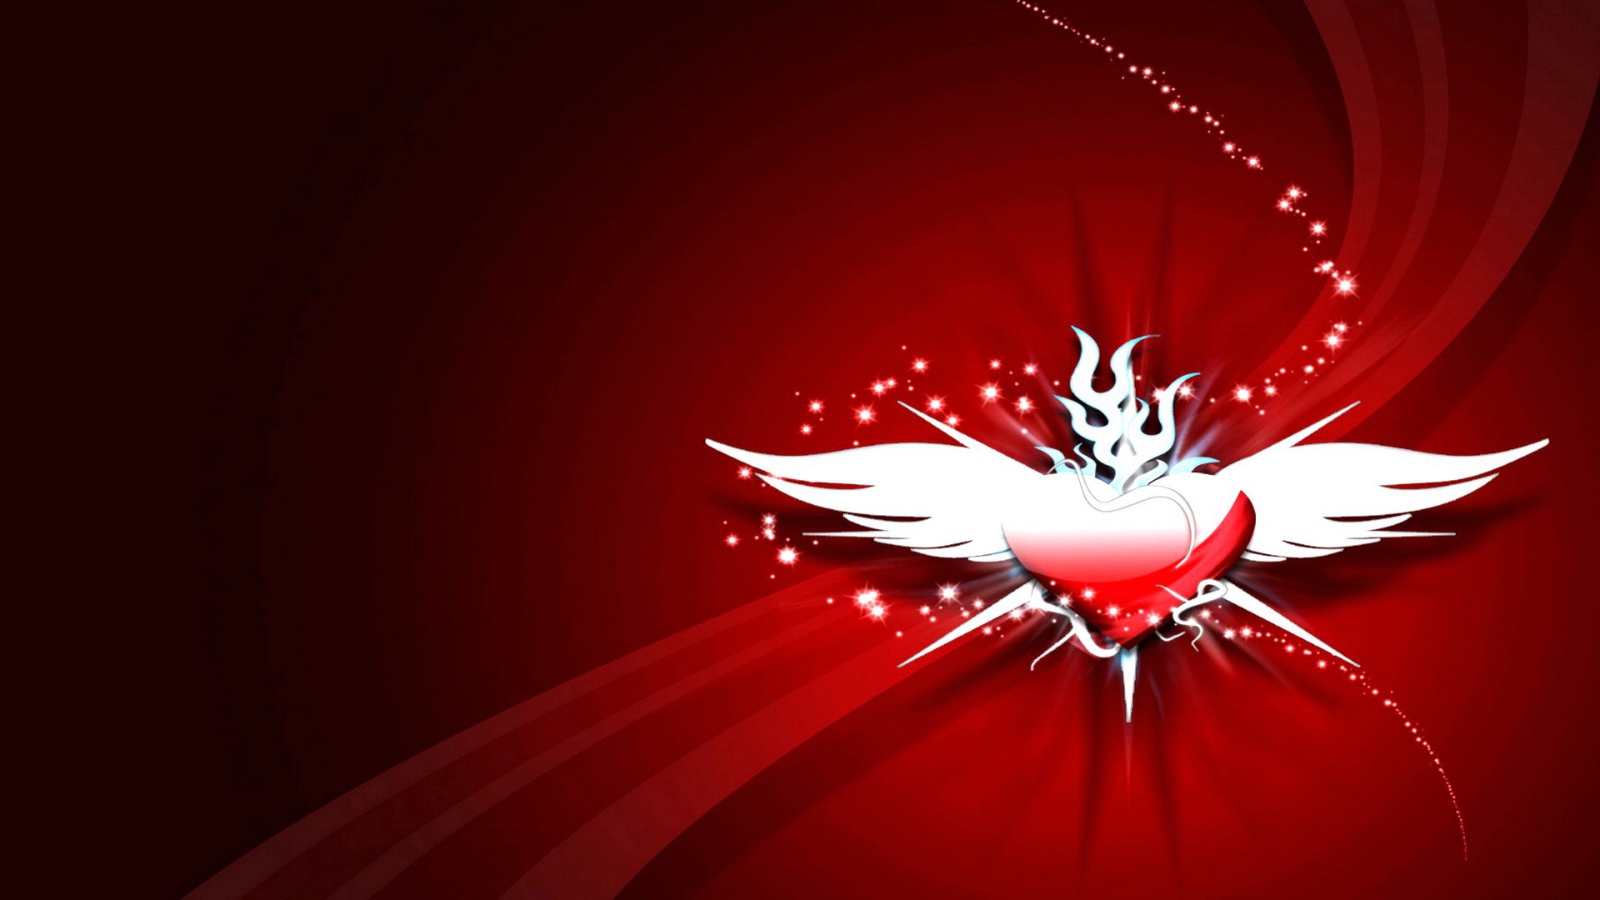 Heart With Wings On A Red Background Desktop Wallpaper